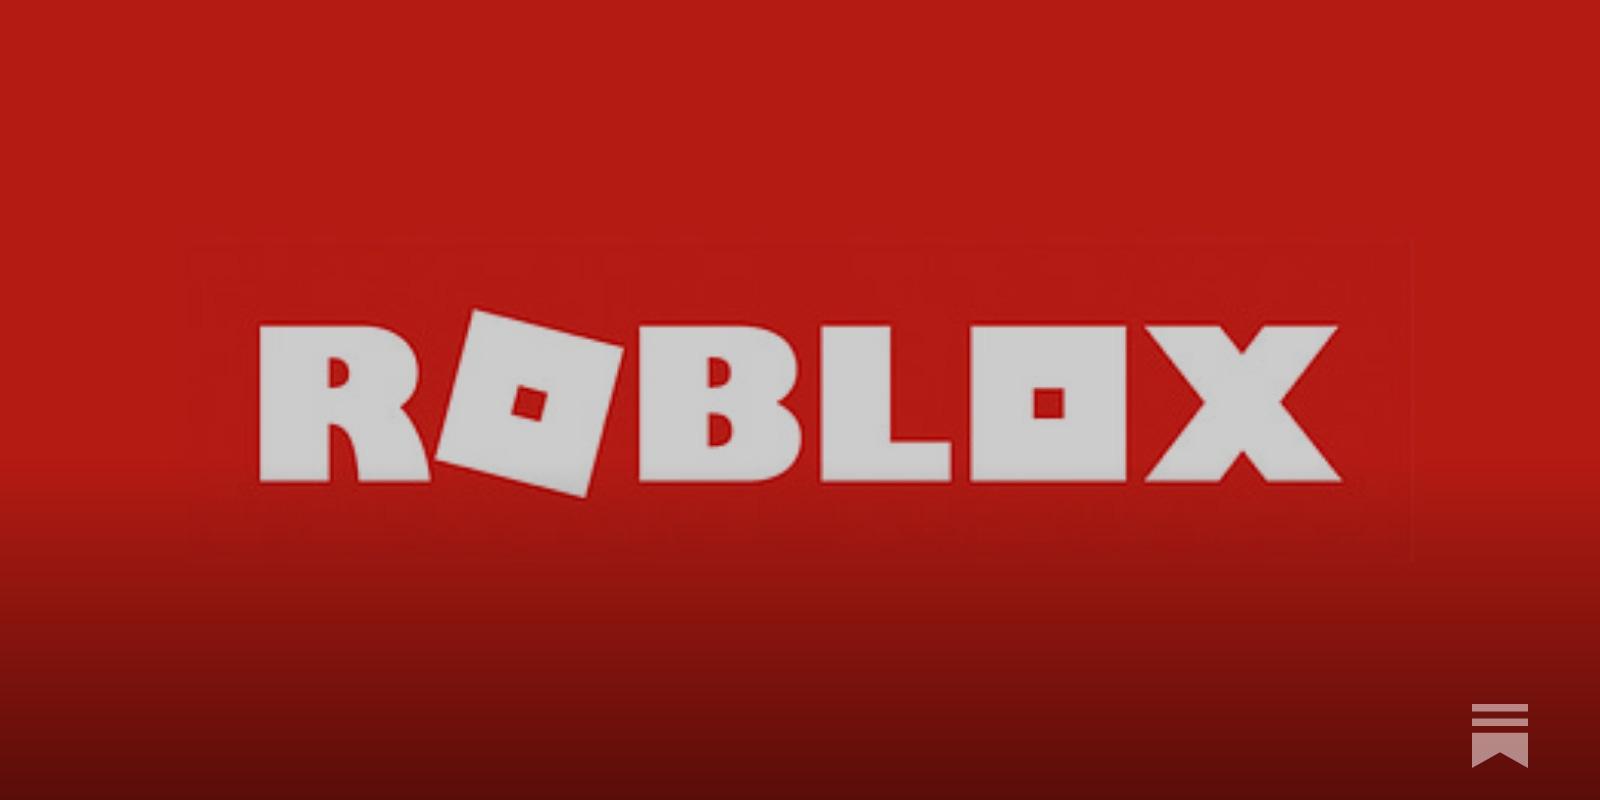 Is metaverse pioneer Roblox ready for fierce competition? This analyst  doesn't think so - MarketWatch